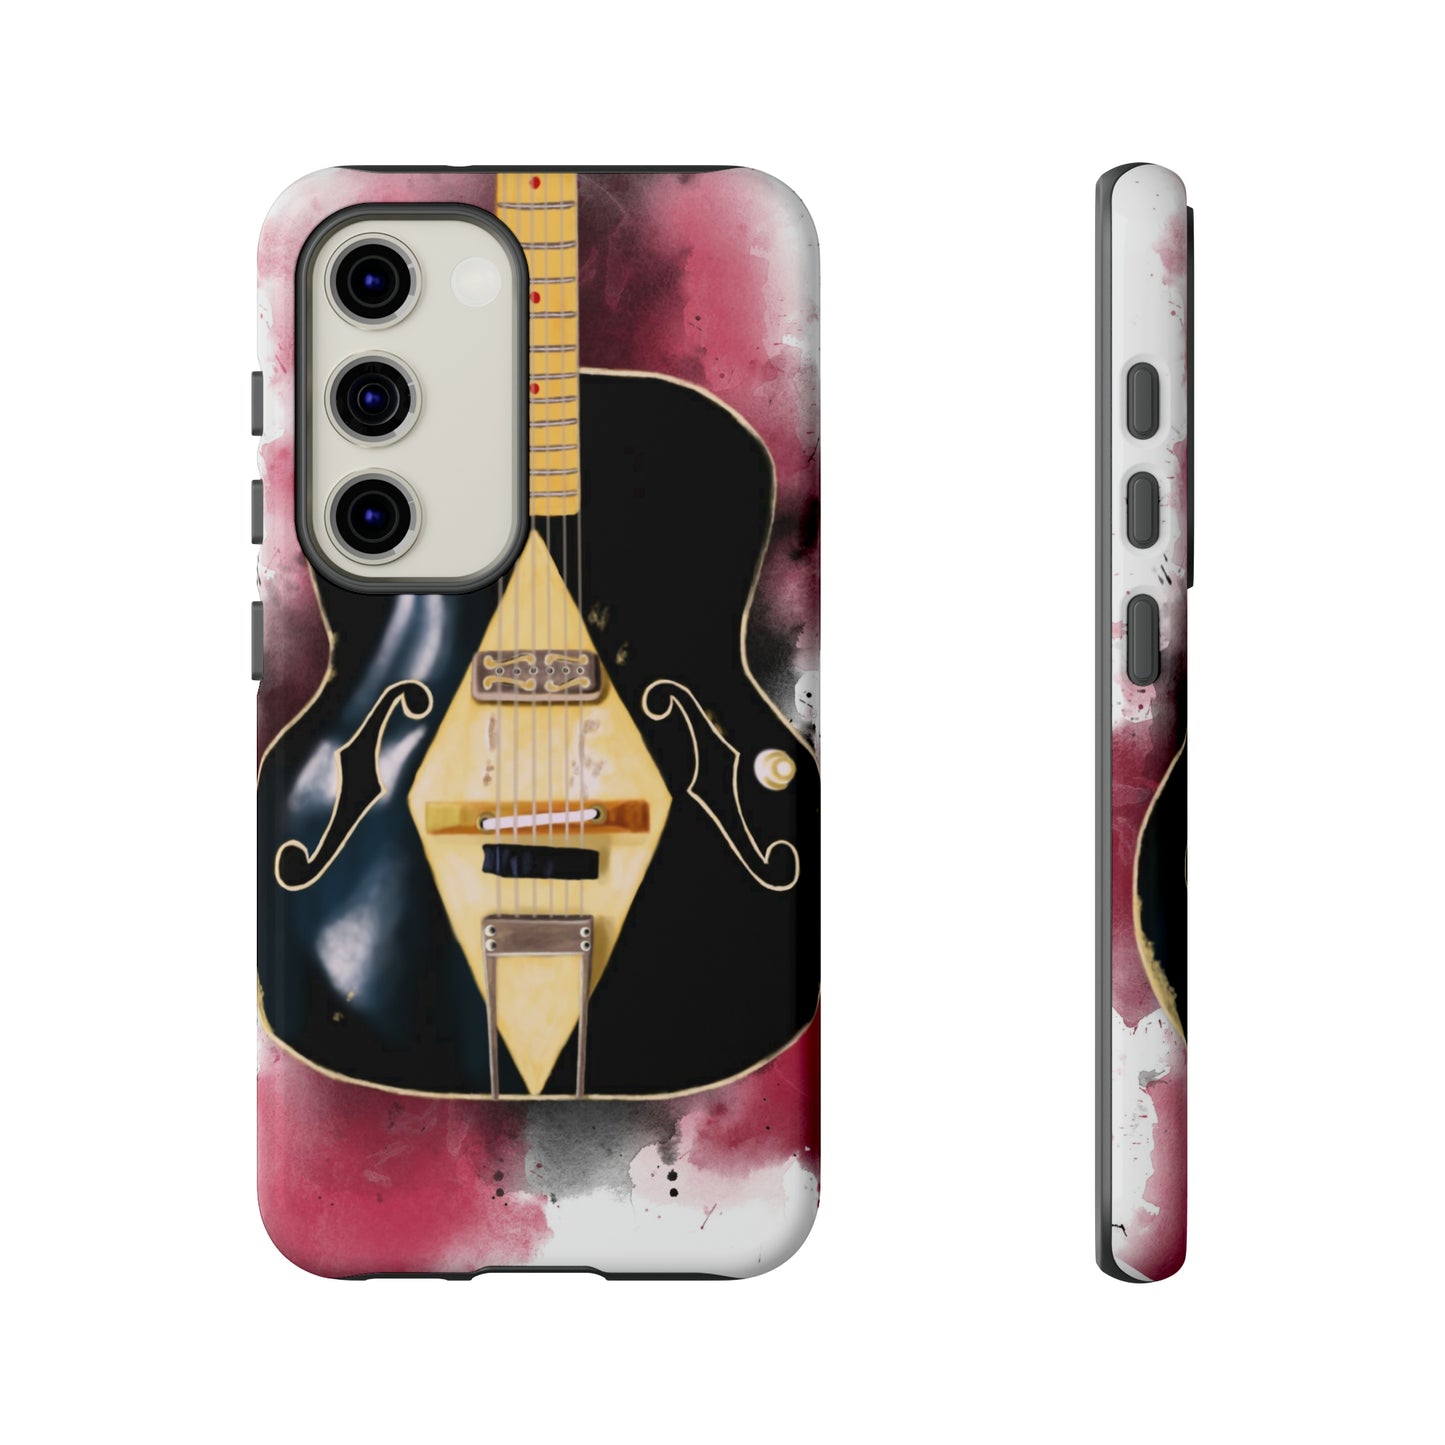 digital painting of a black-vintage white electric guitar printed on samsung tough phone case